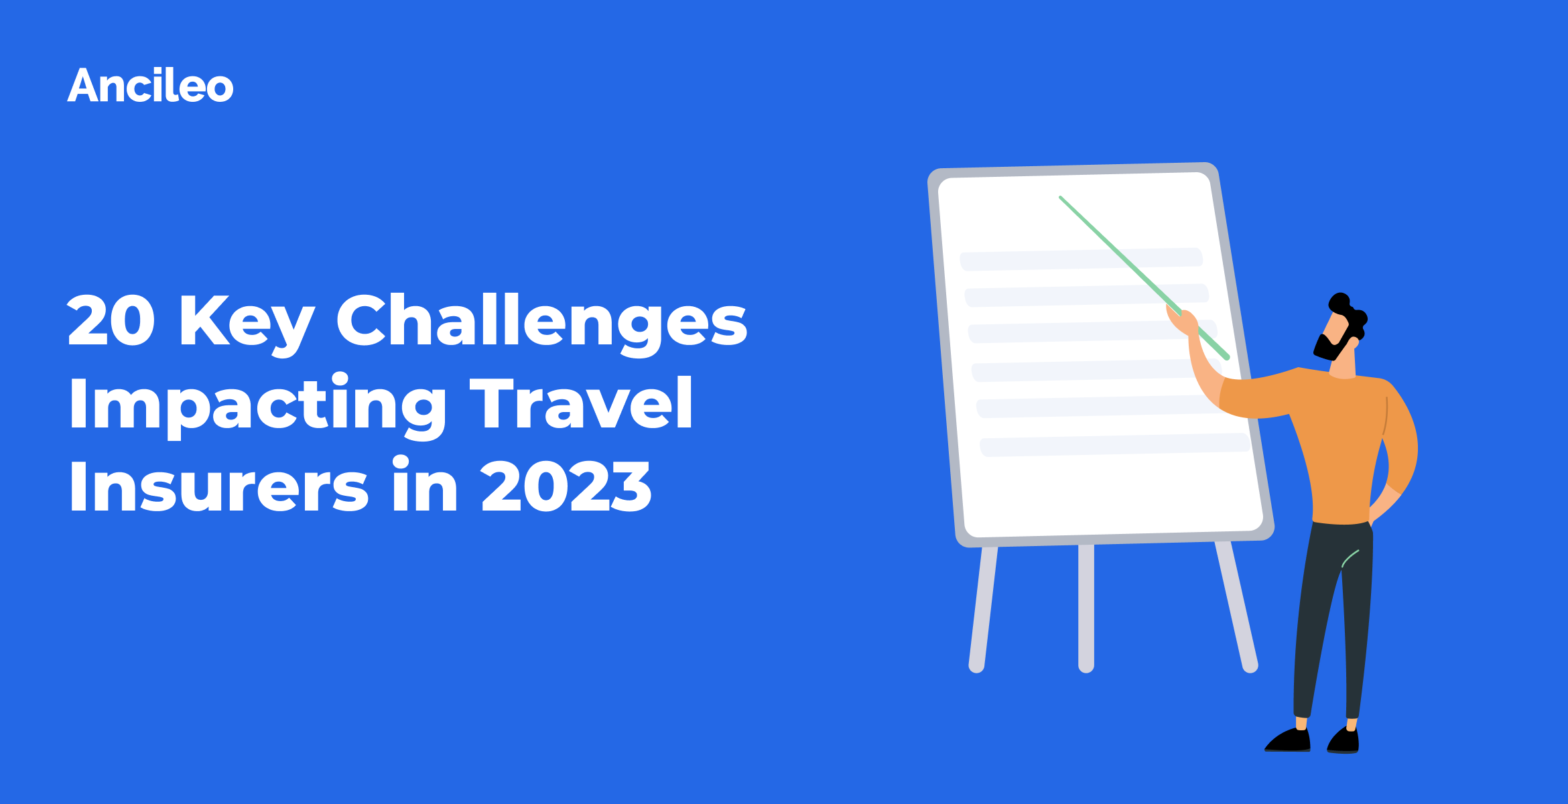 20 Key Challenges Impacting Travel Insurers in 2023